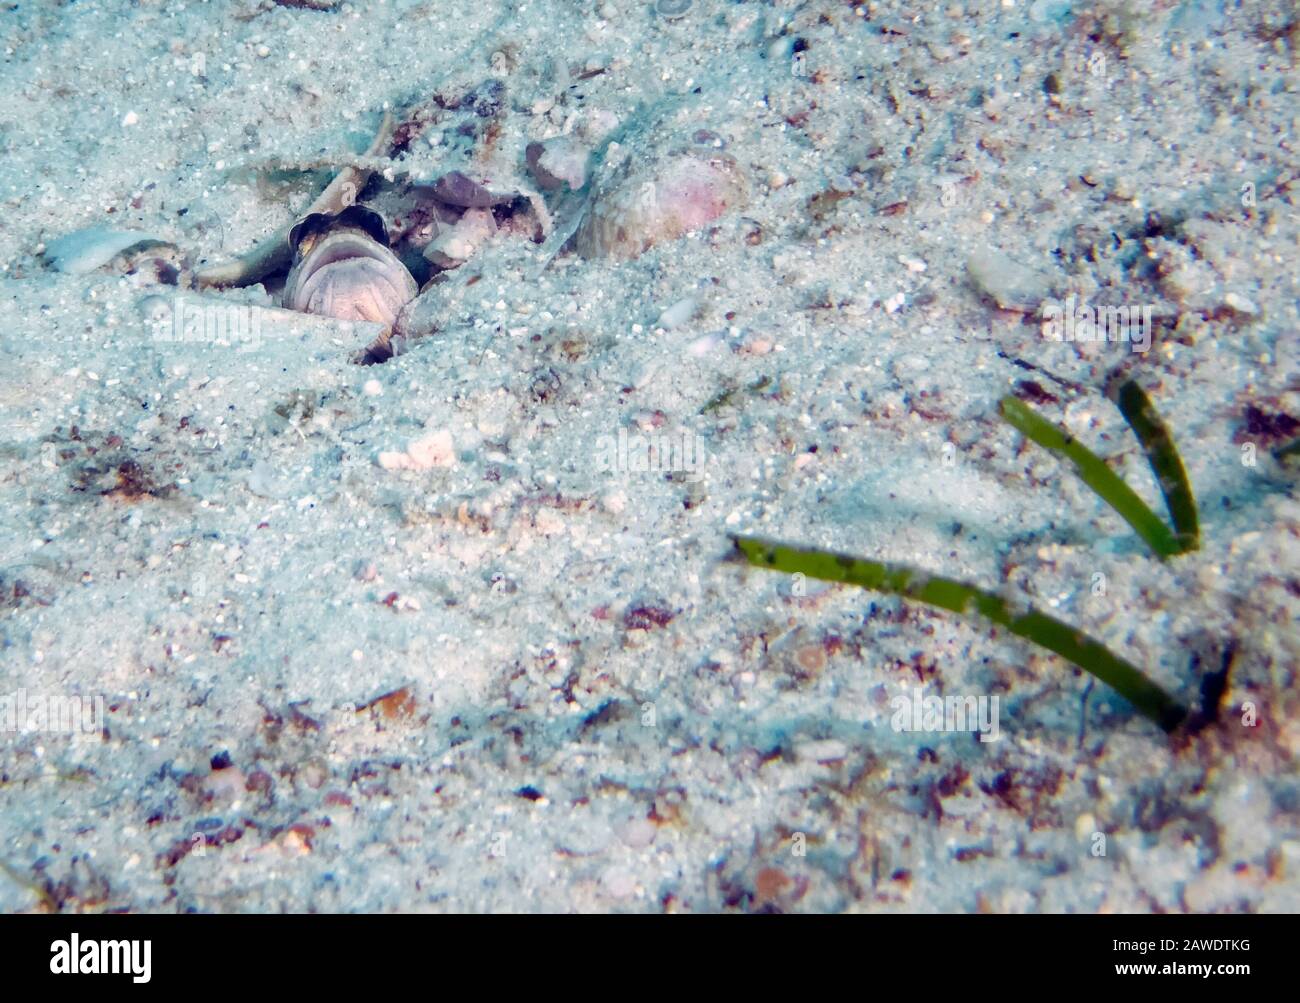 A Jawfish (Opistognathus sp.) poking it's head our of the sand Stock Photo